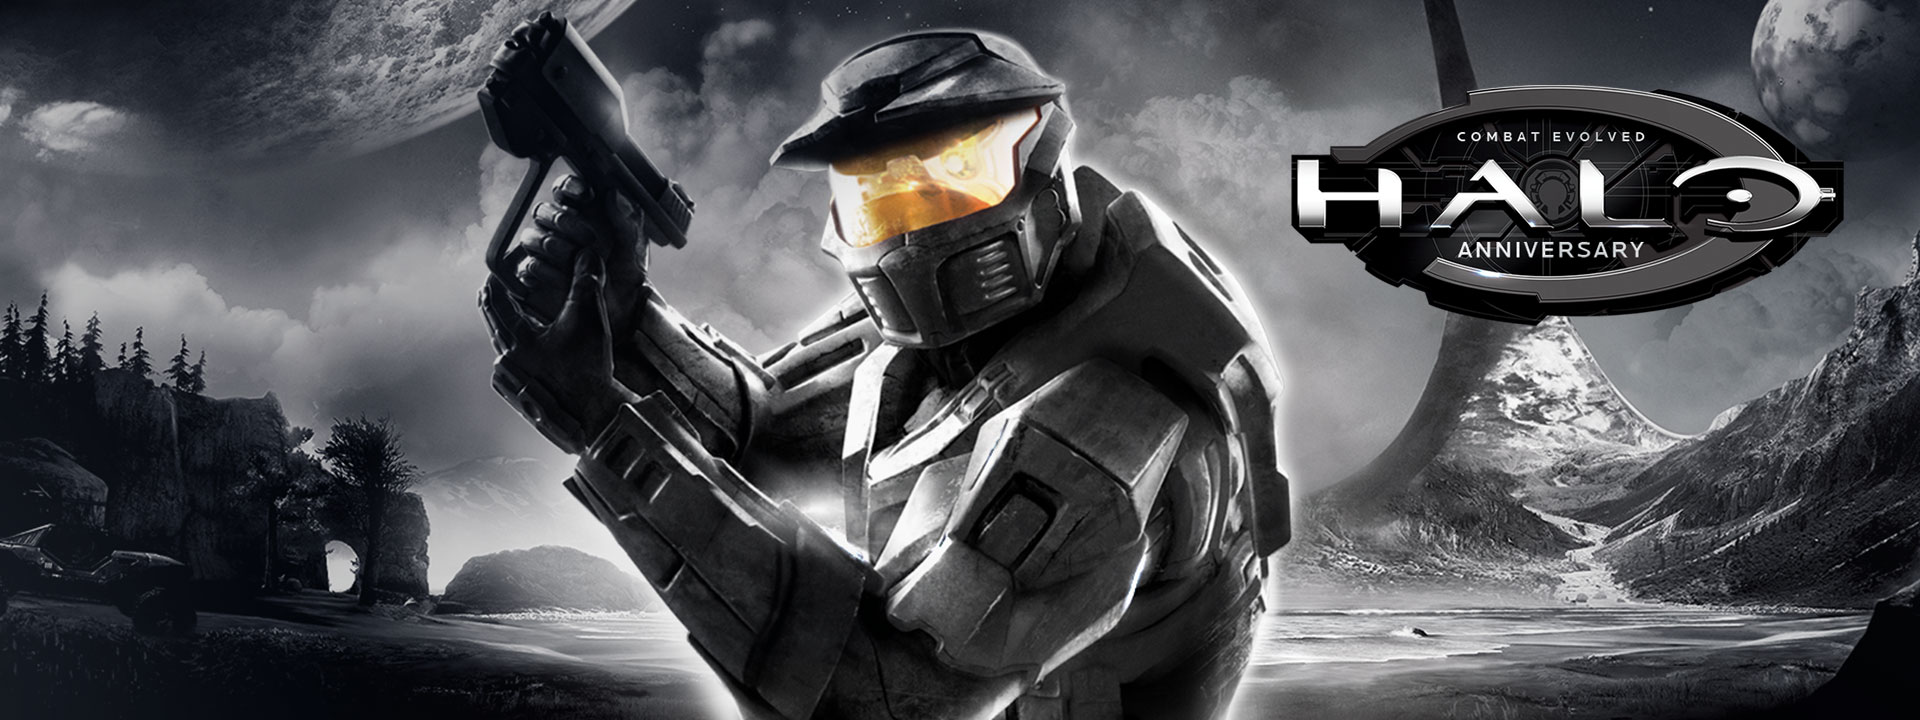 halo master chief collection price xbox store